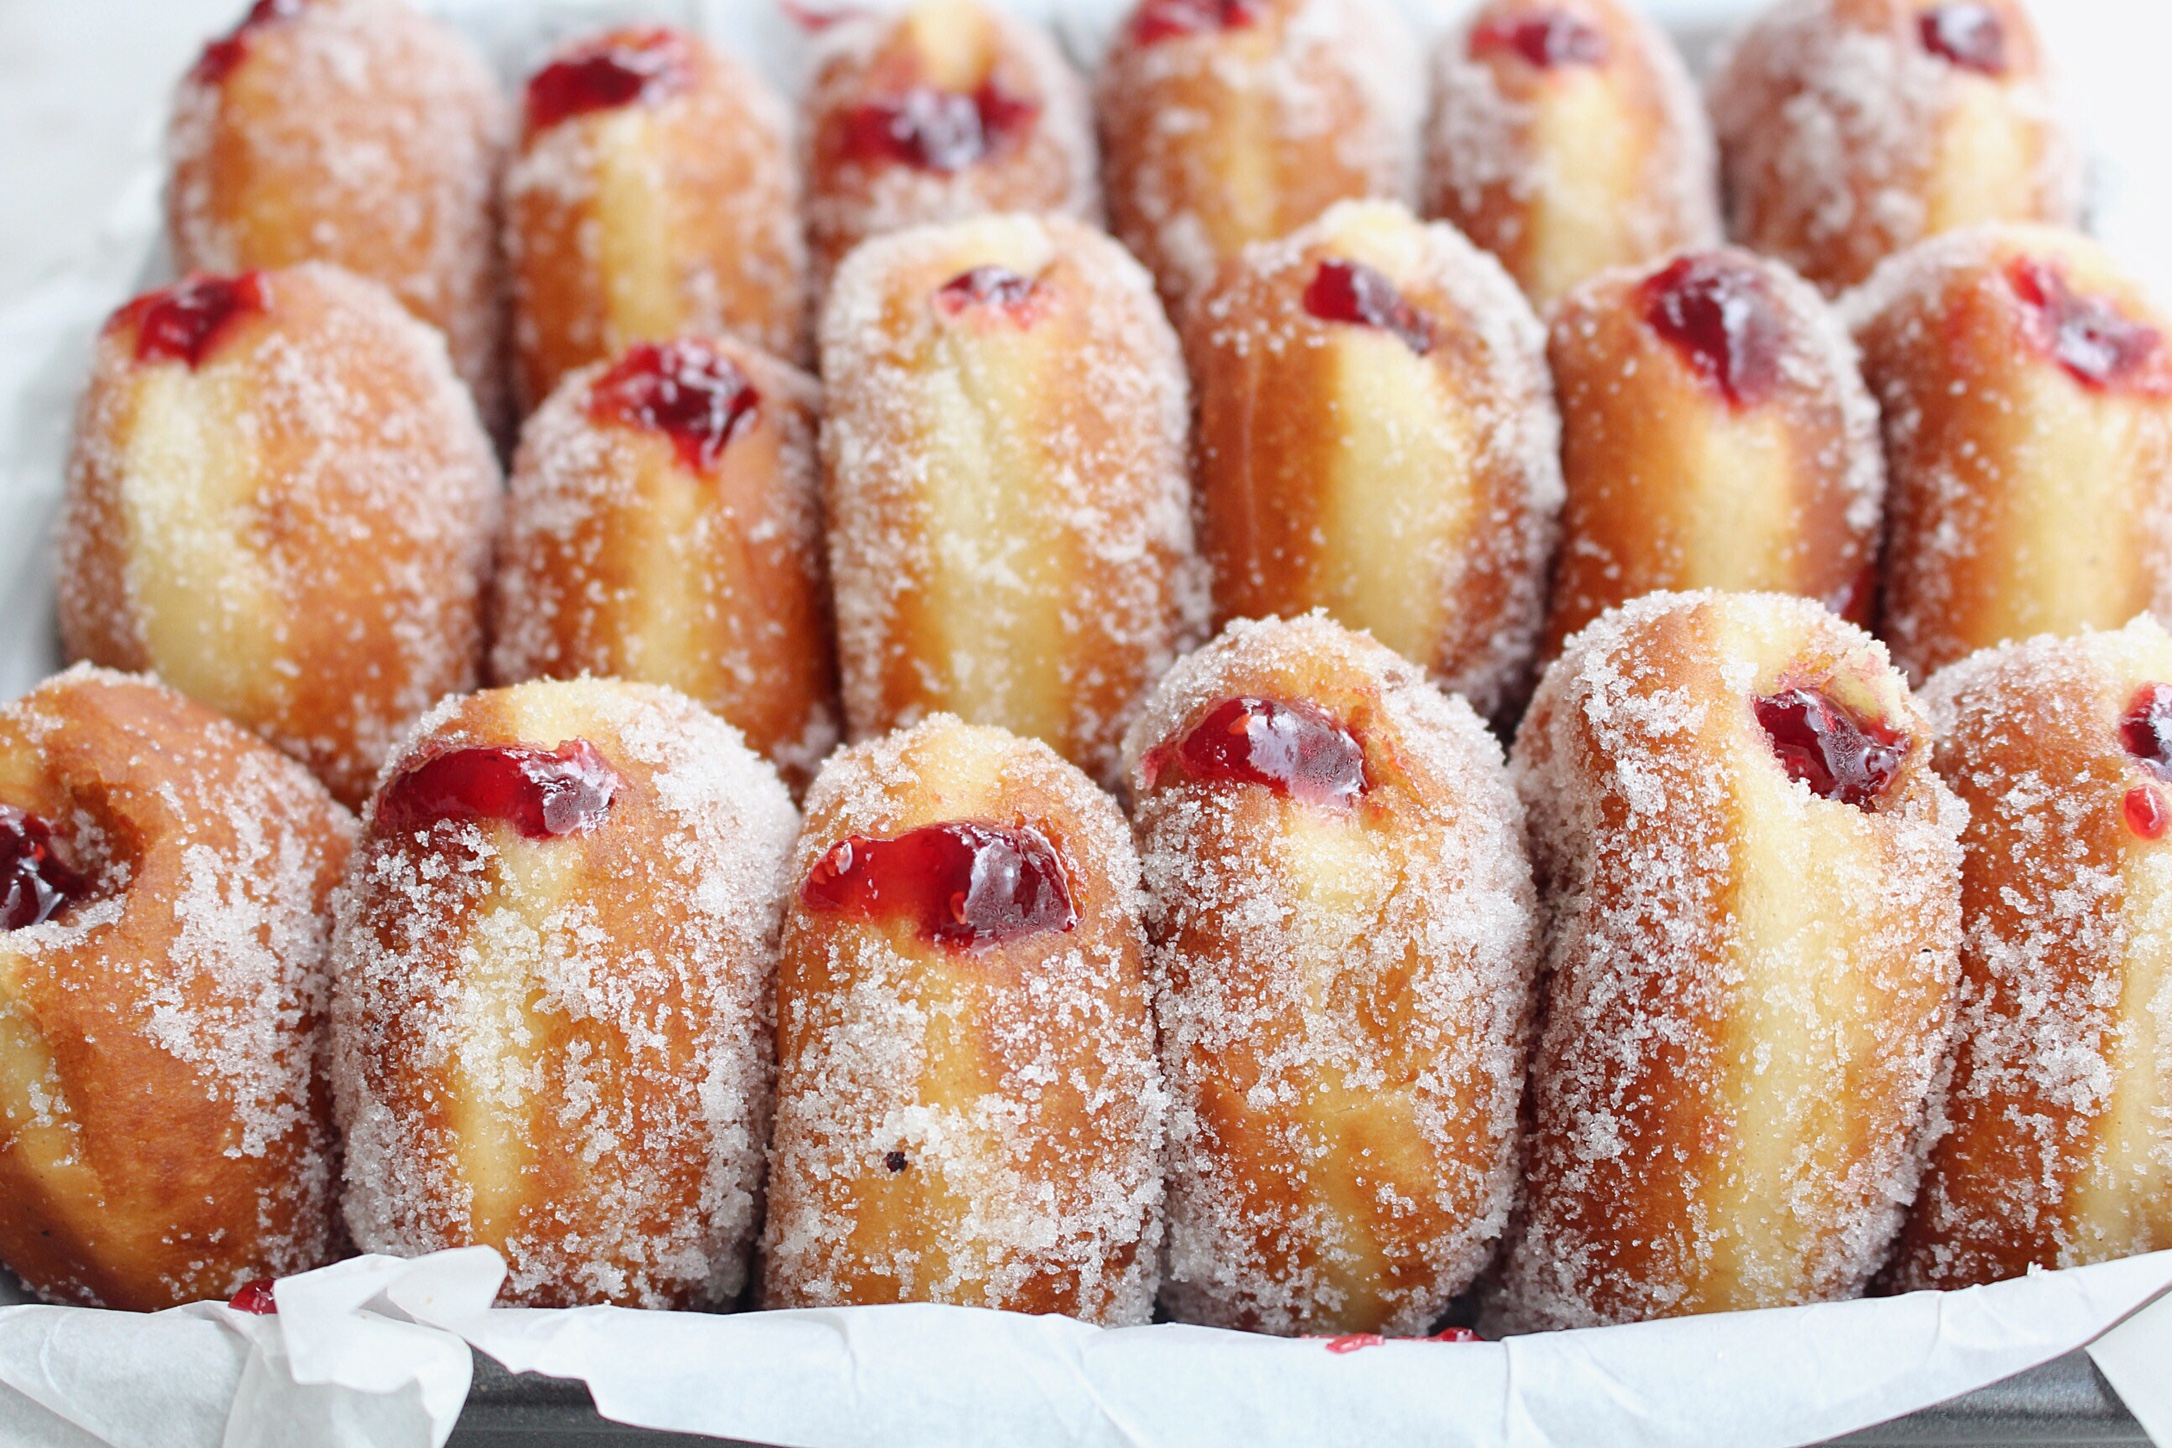 Raspberry Jam Donuts With Vanilla Sugar The Sweet And Simple Kitchen